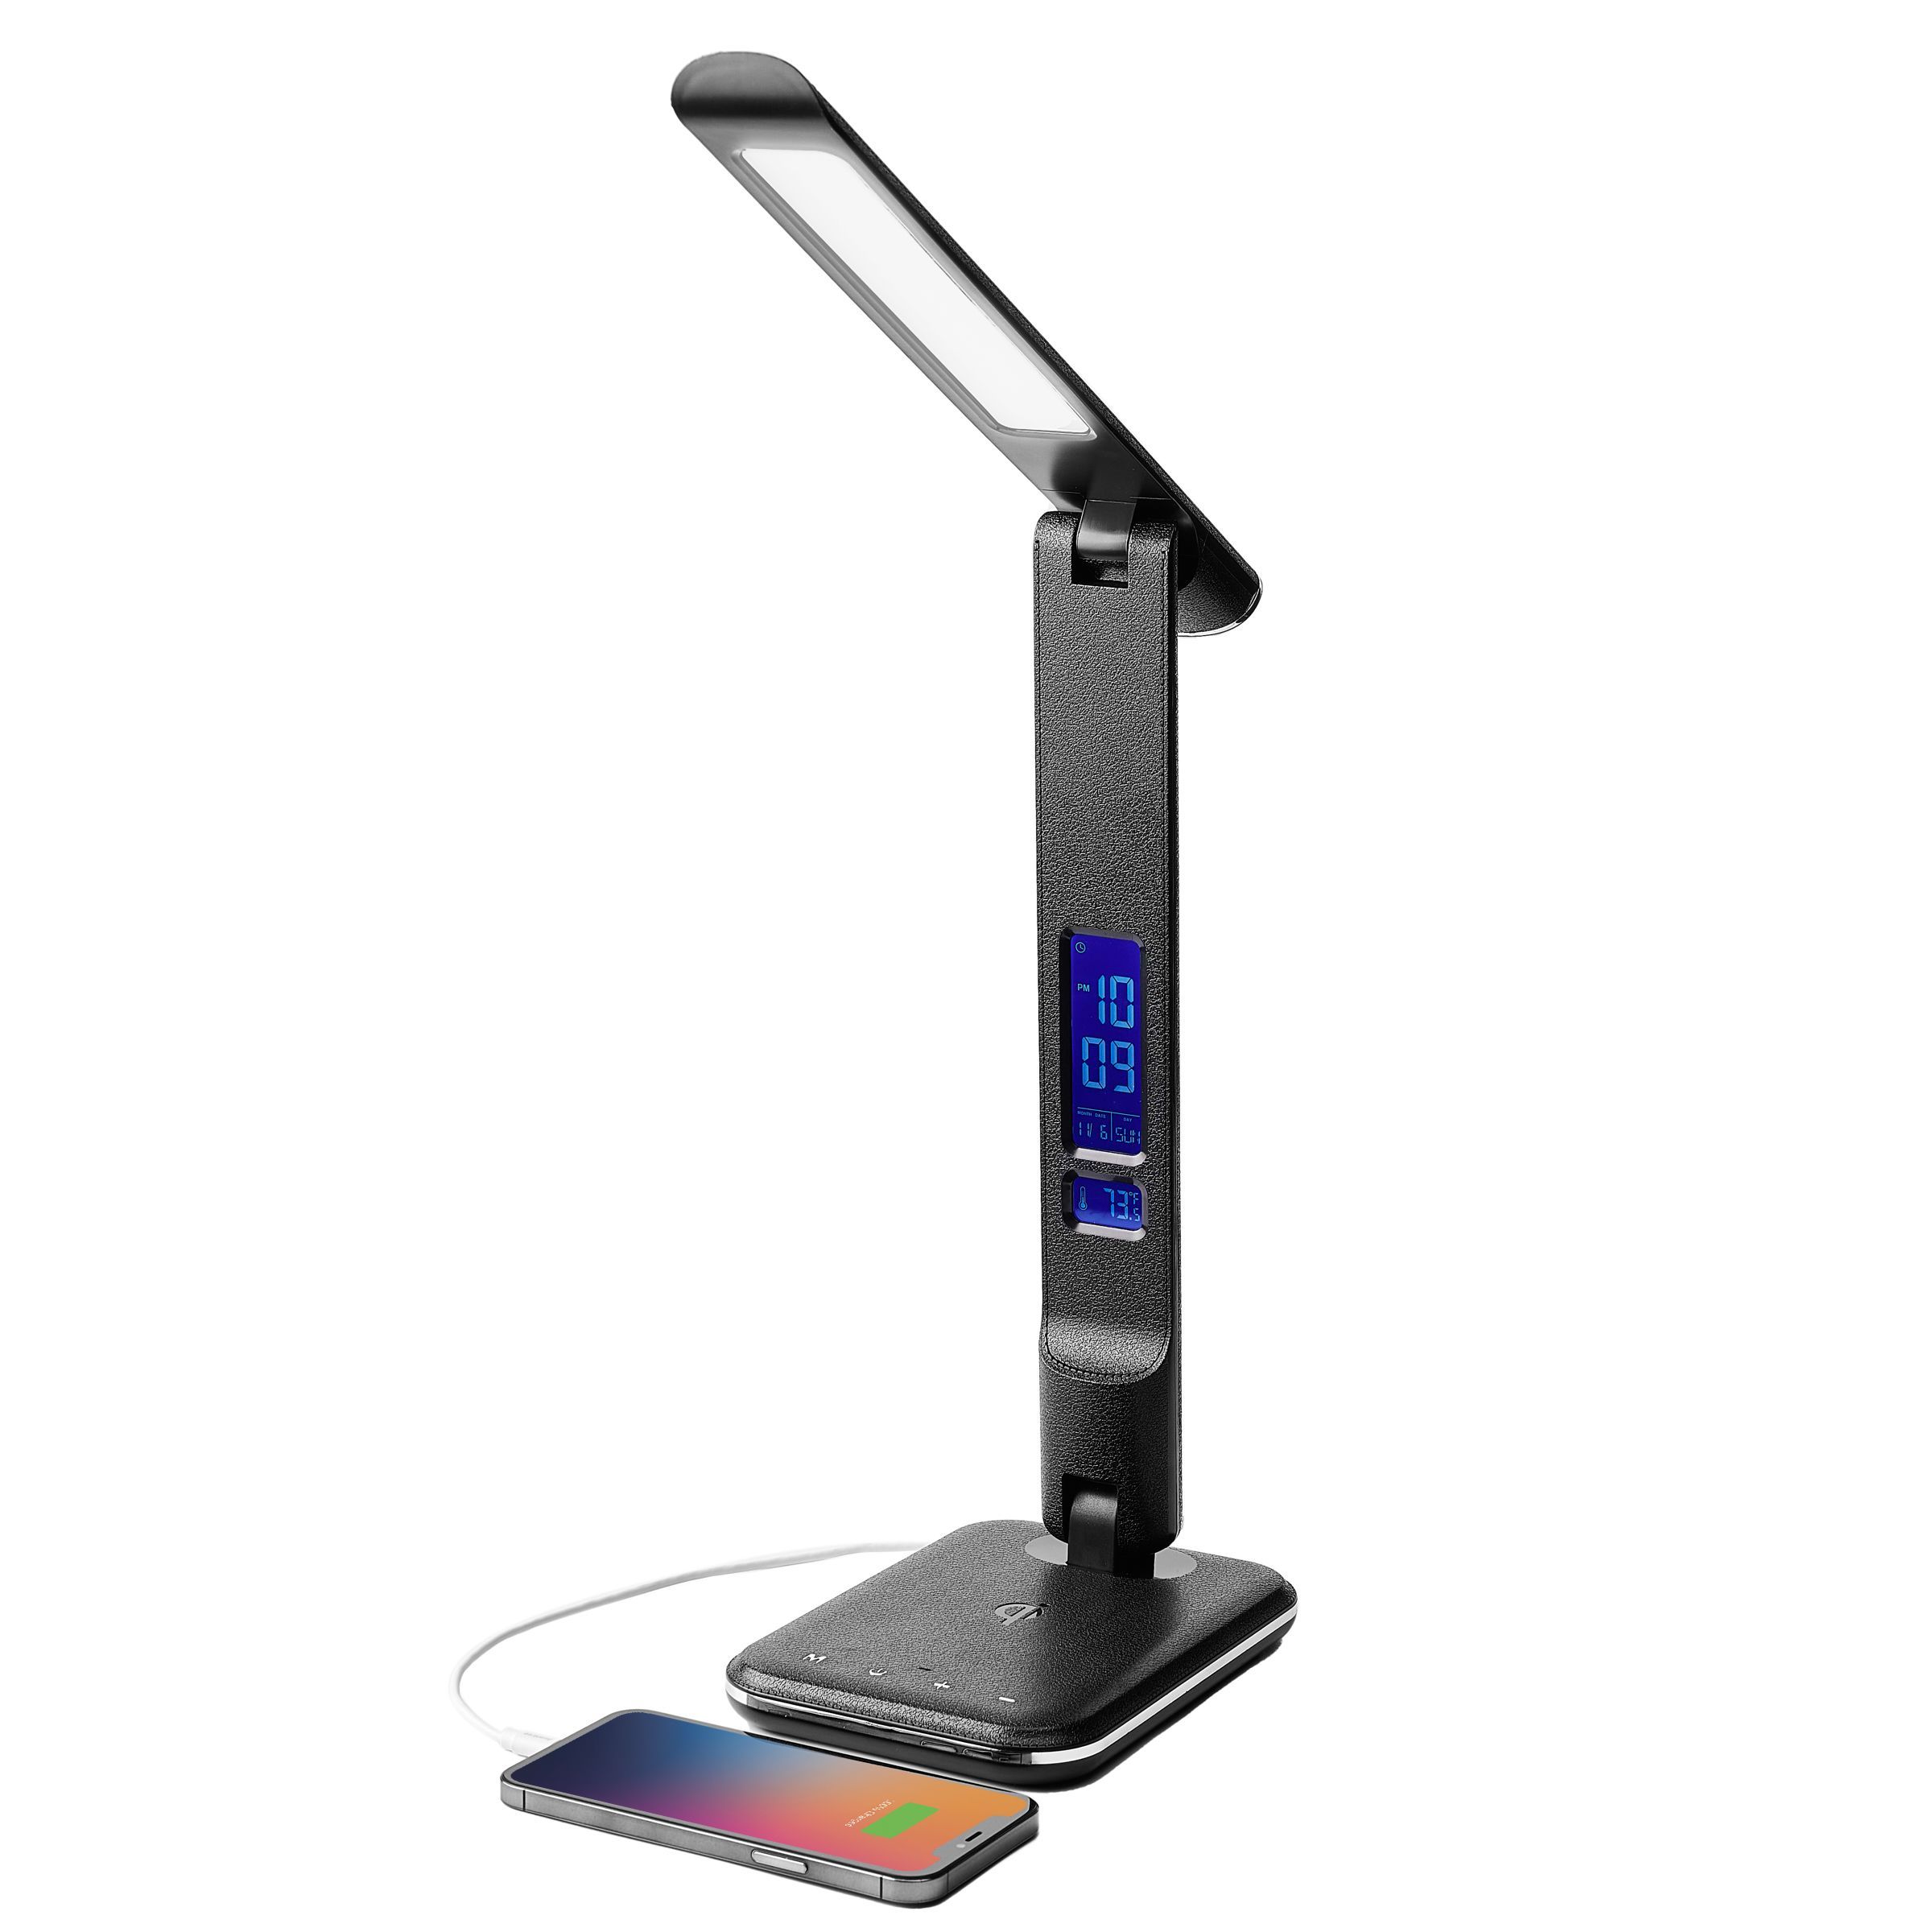 iHome POWERLIGHT PRO+ Foldable LED Lamp with Wireless Charging, USB Charging and Alarm Clock, Black